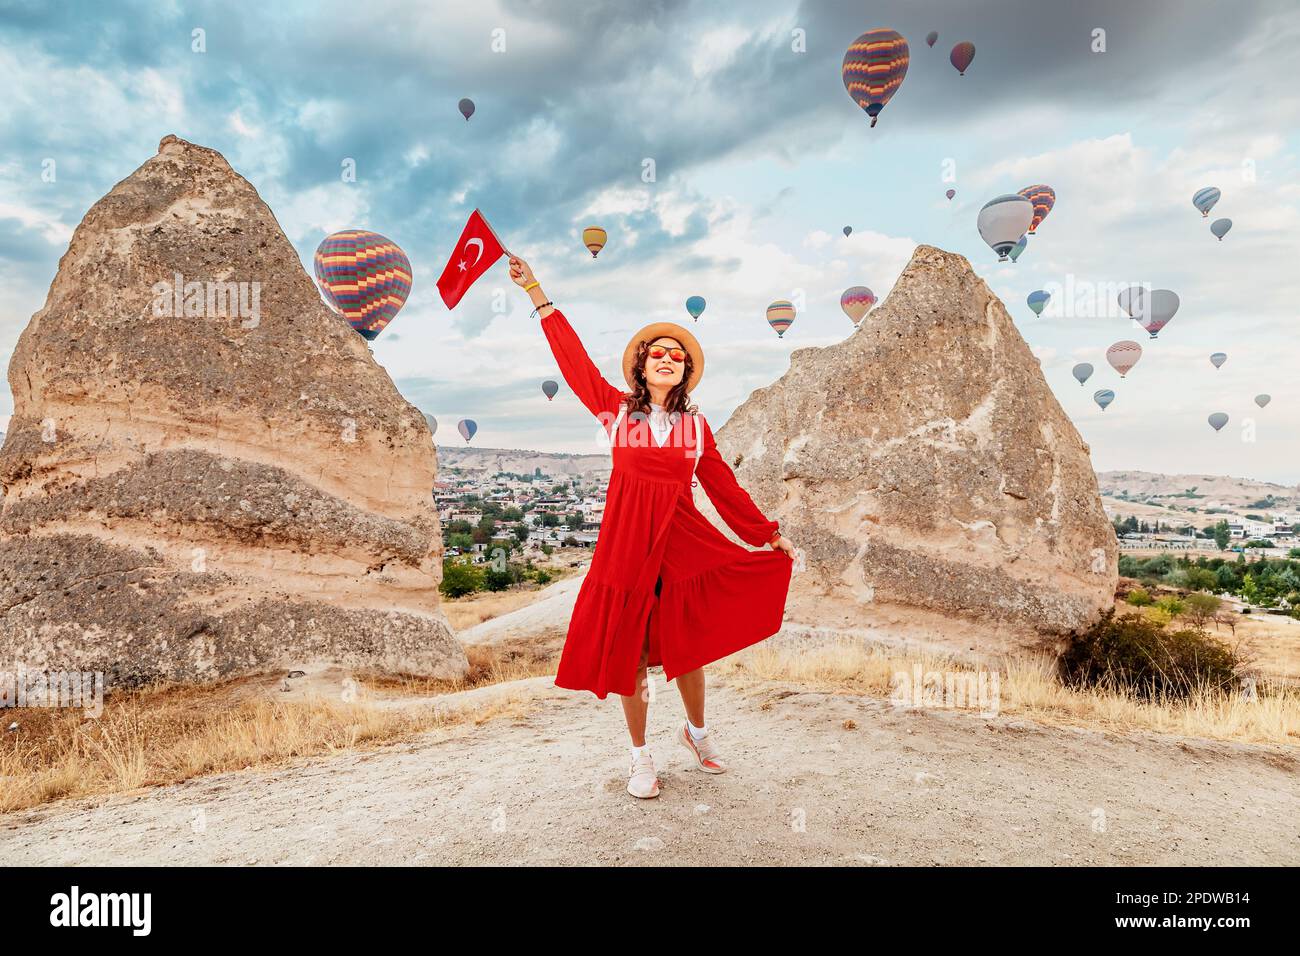 Get a glimpse of Cappadocia's breathtaking landscapes through the eyes of a young woman as she watches the hot air balloons soar and displays the Turk Stock Photo